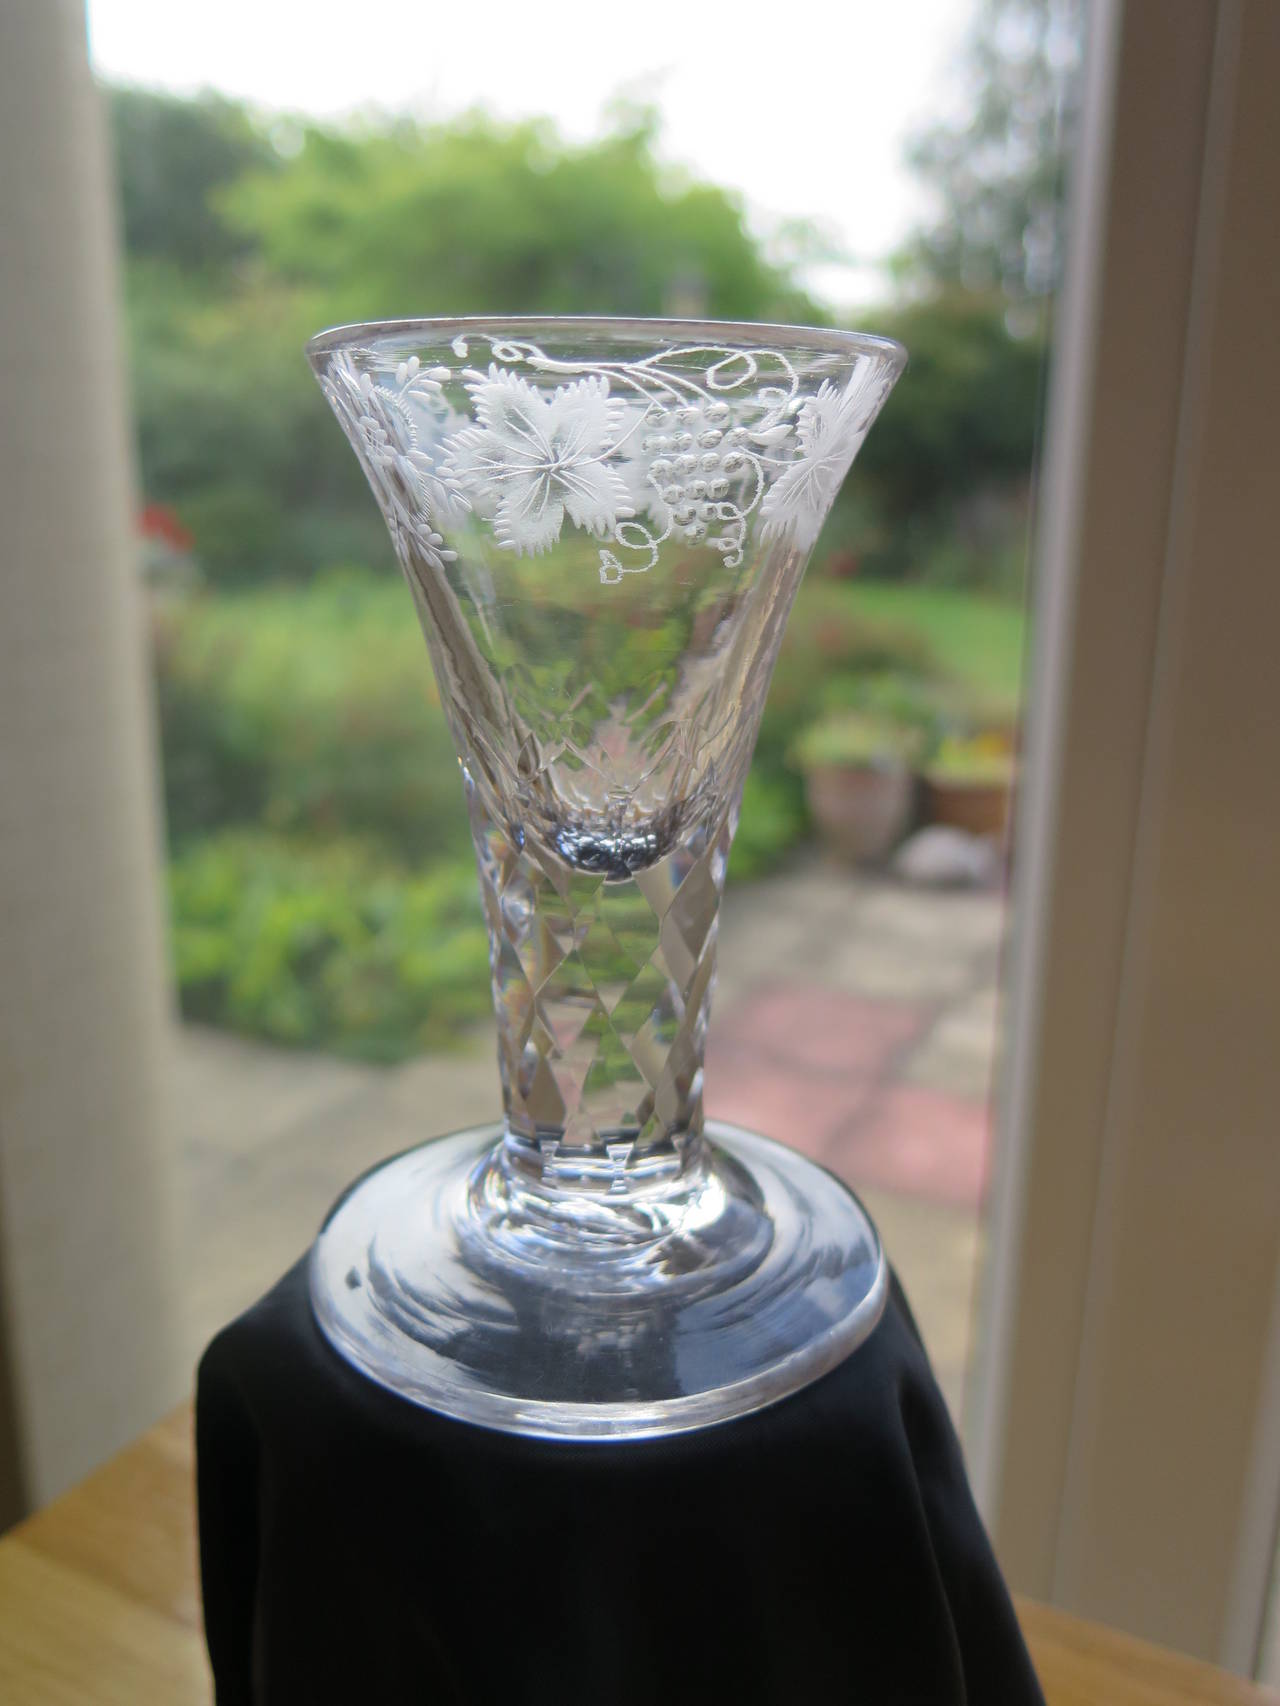 This is a fine English, hand blown drinking glass, made from lead glass in the 18th century, circa 1785.

Short, heavy, thick stemmed glasses like this with a thick foot are known as firing glasses, as they were used for toasts at people gatherings.